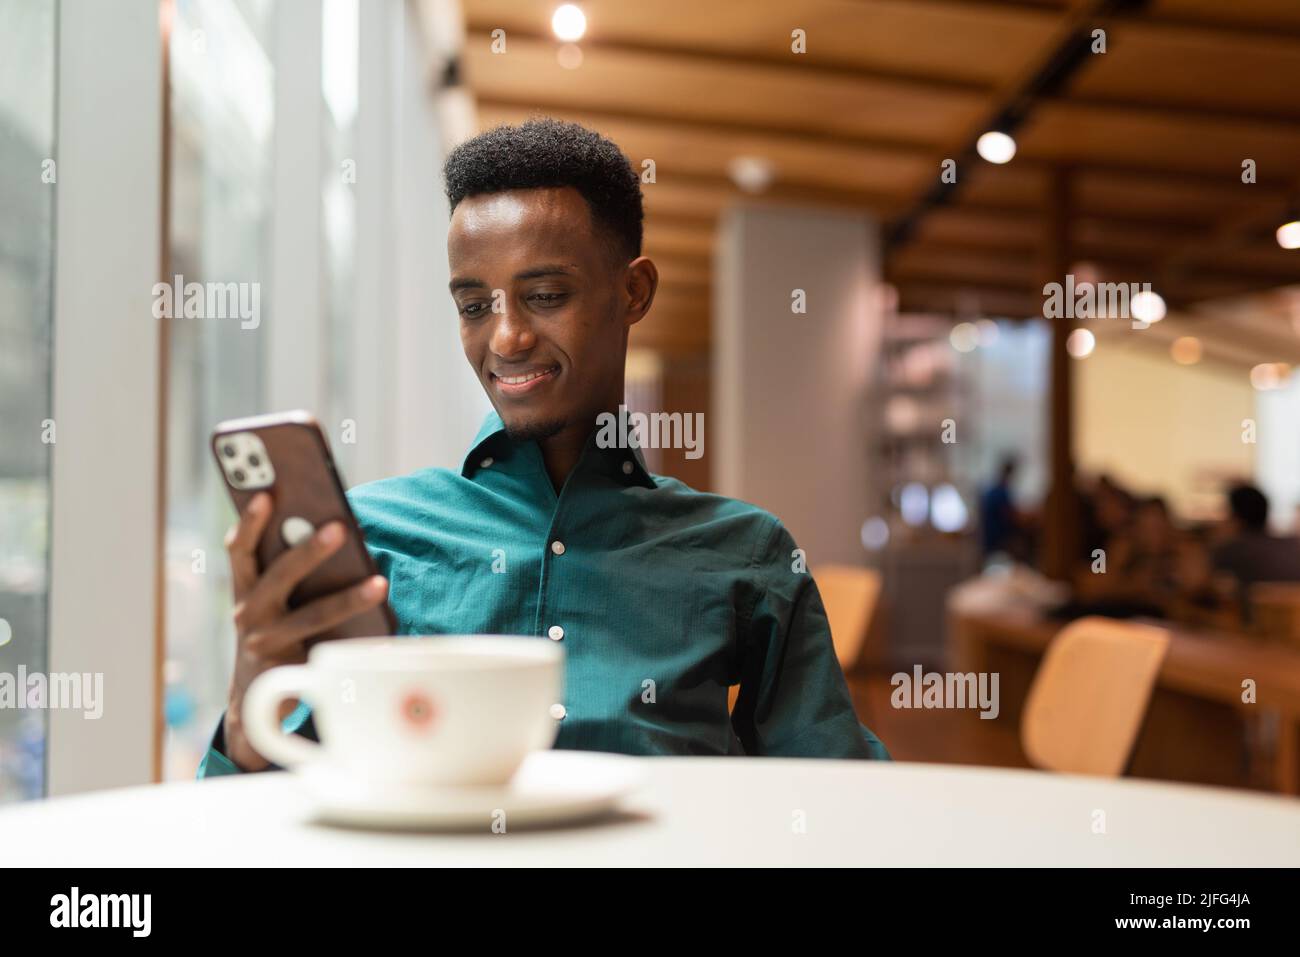 Handsome young black man in coffee shop using phone Stock Photo